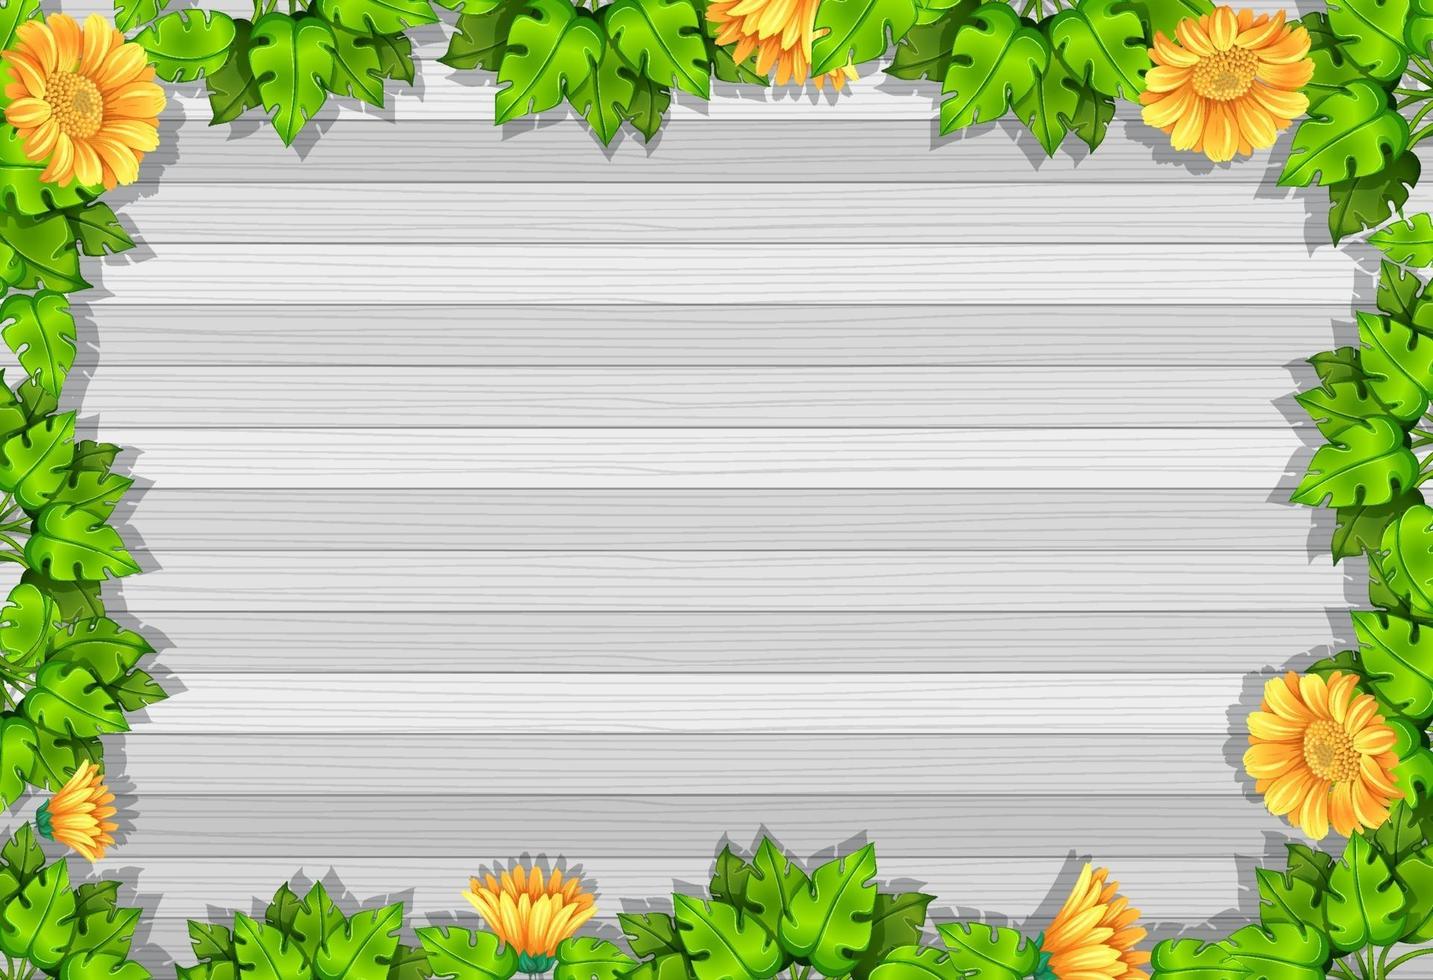 Top view of blank wooden table with leaves and yellow flower elements vector